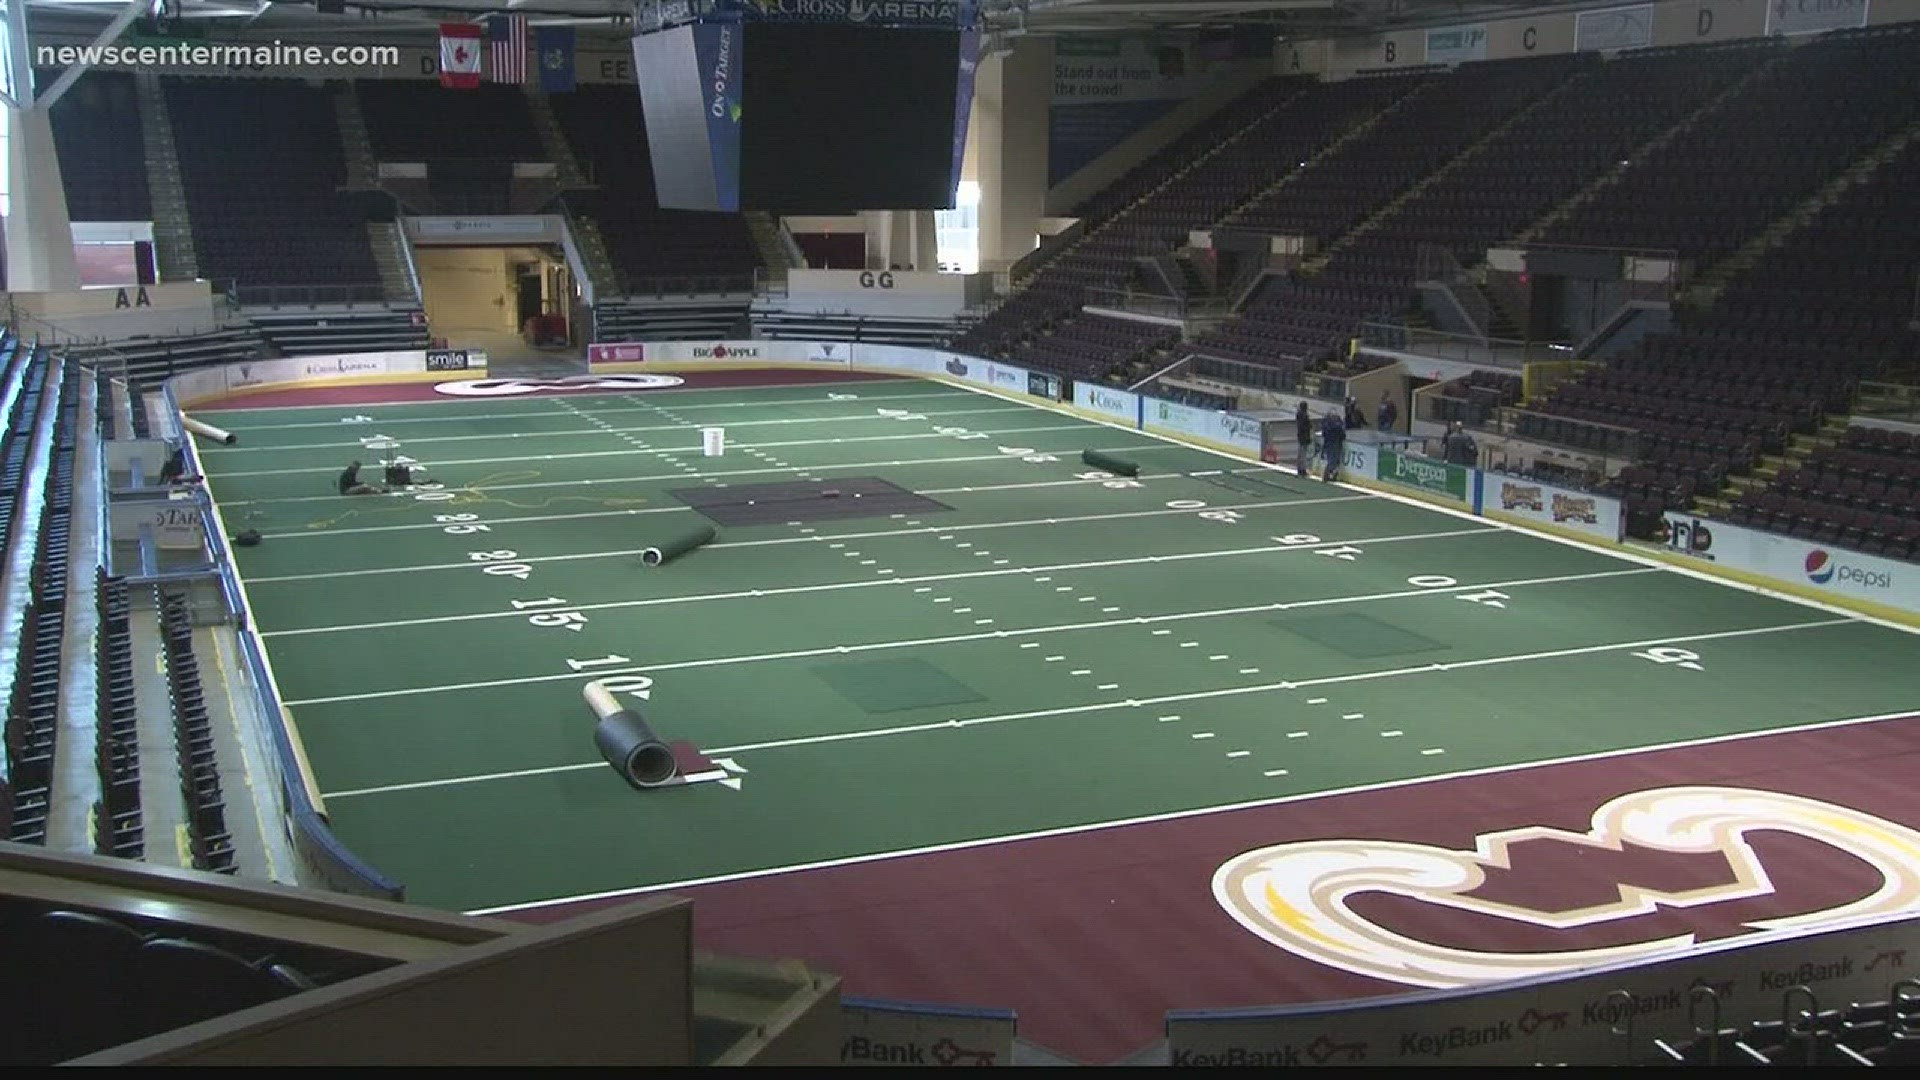 Cross Arena transformed for arena football